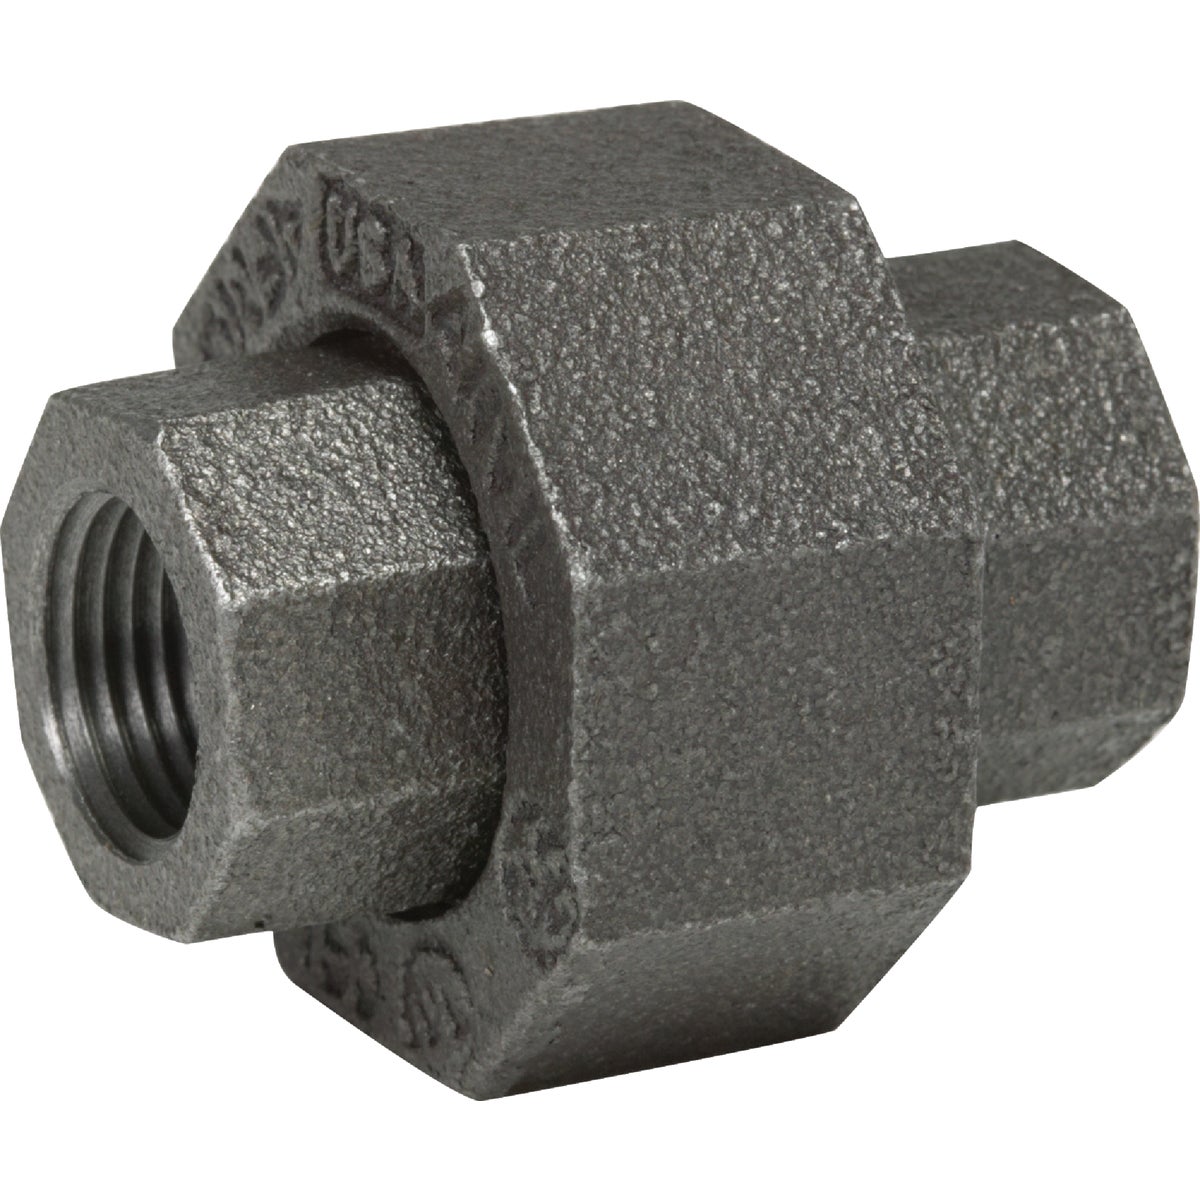 Item 433935, Malleable black iron pipe fittings. Black finish resists rust.